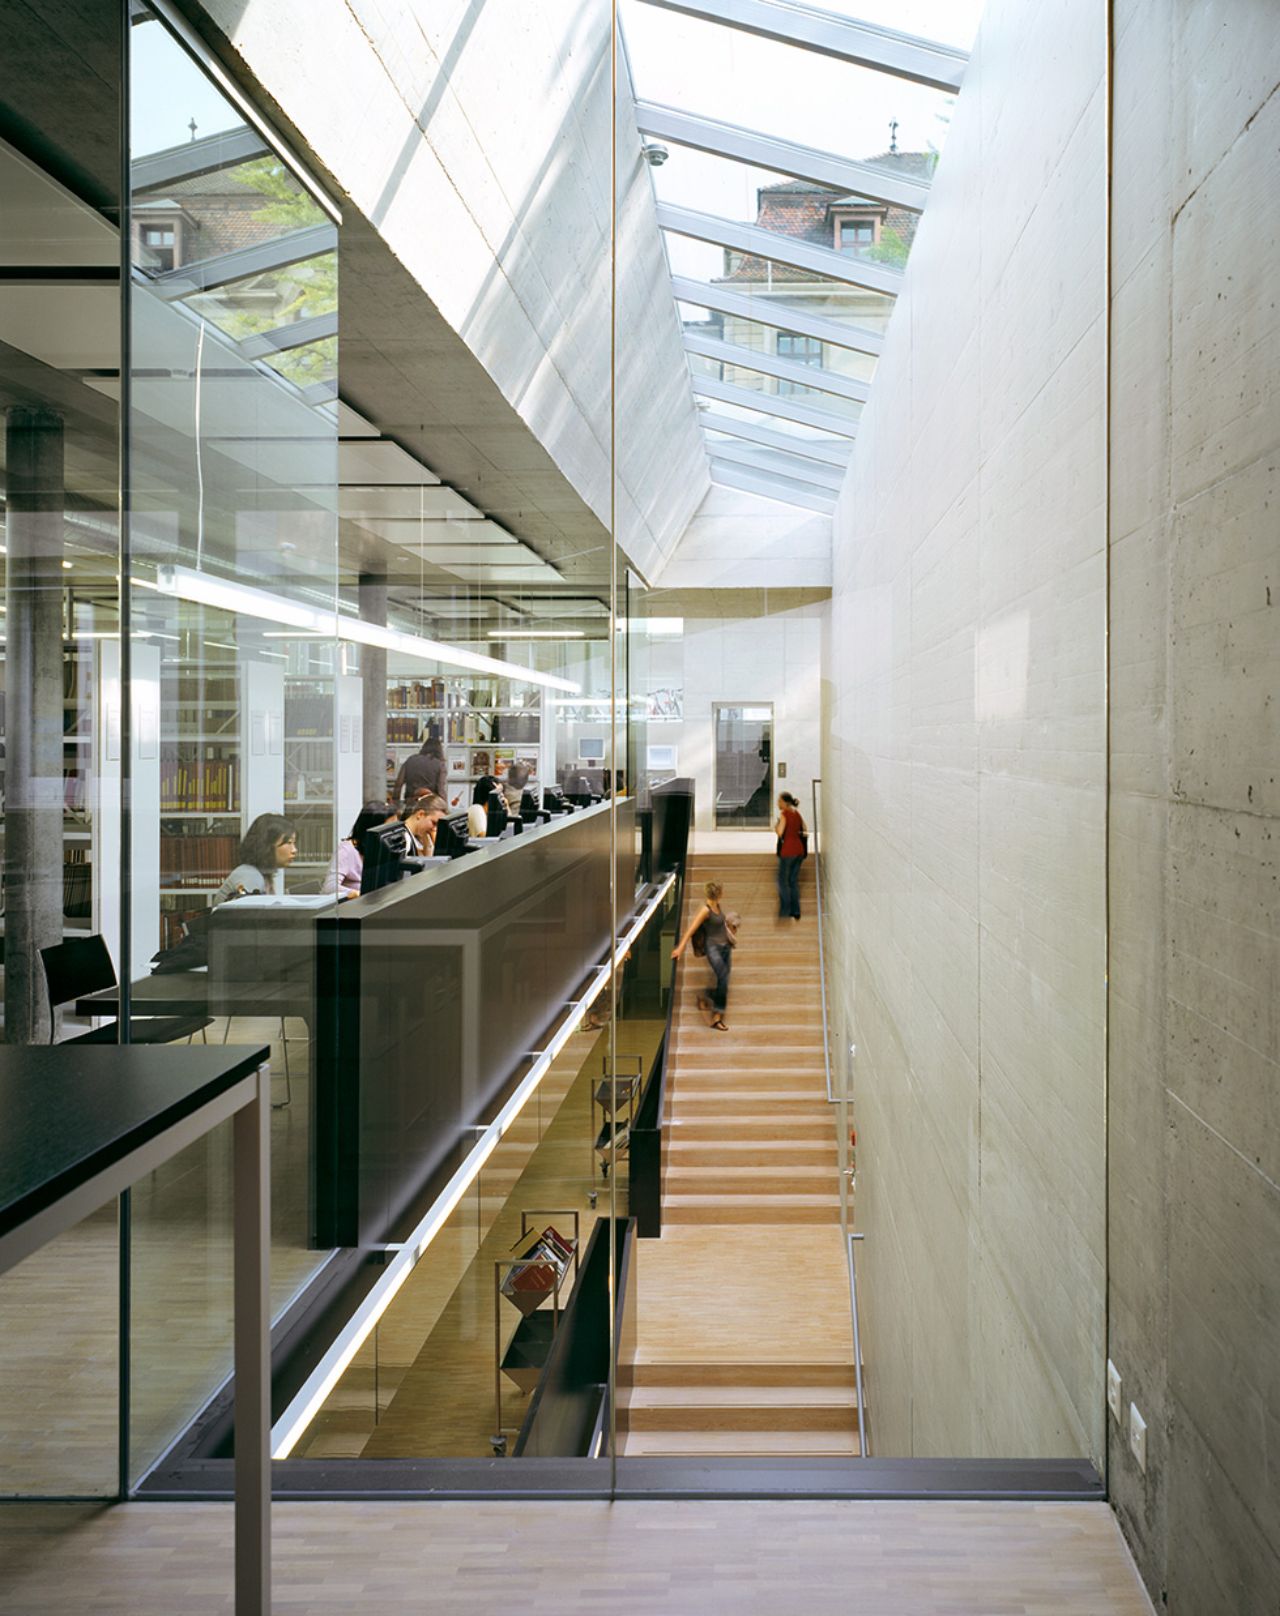 The cascade staircase in the Vera Oeri Library with a skylight frieze